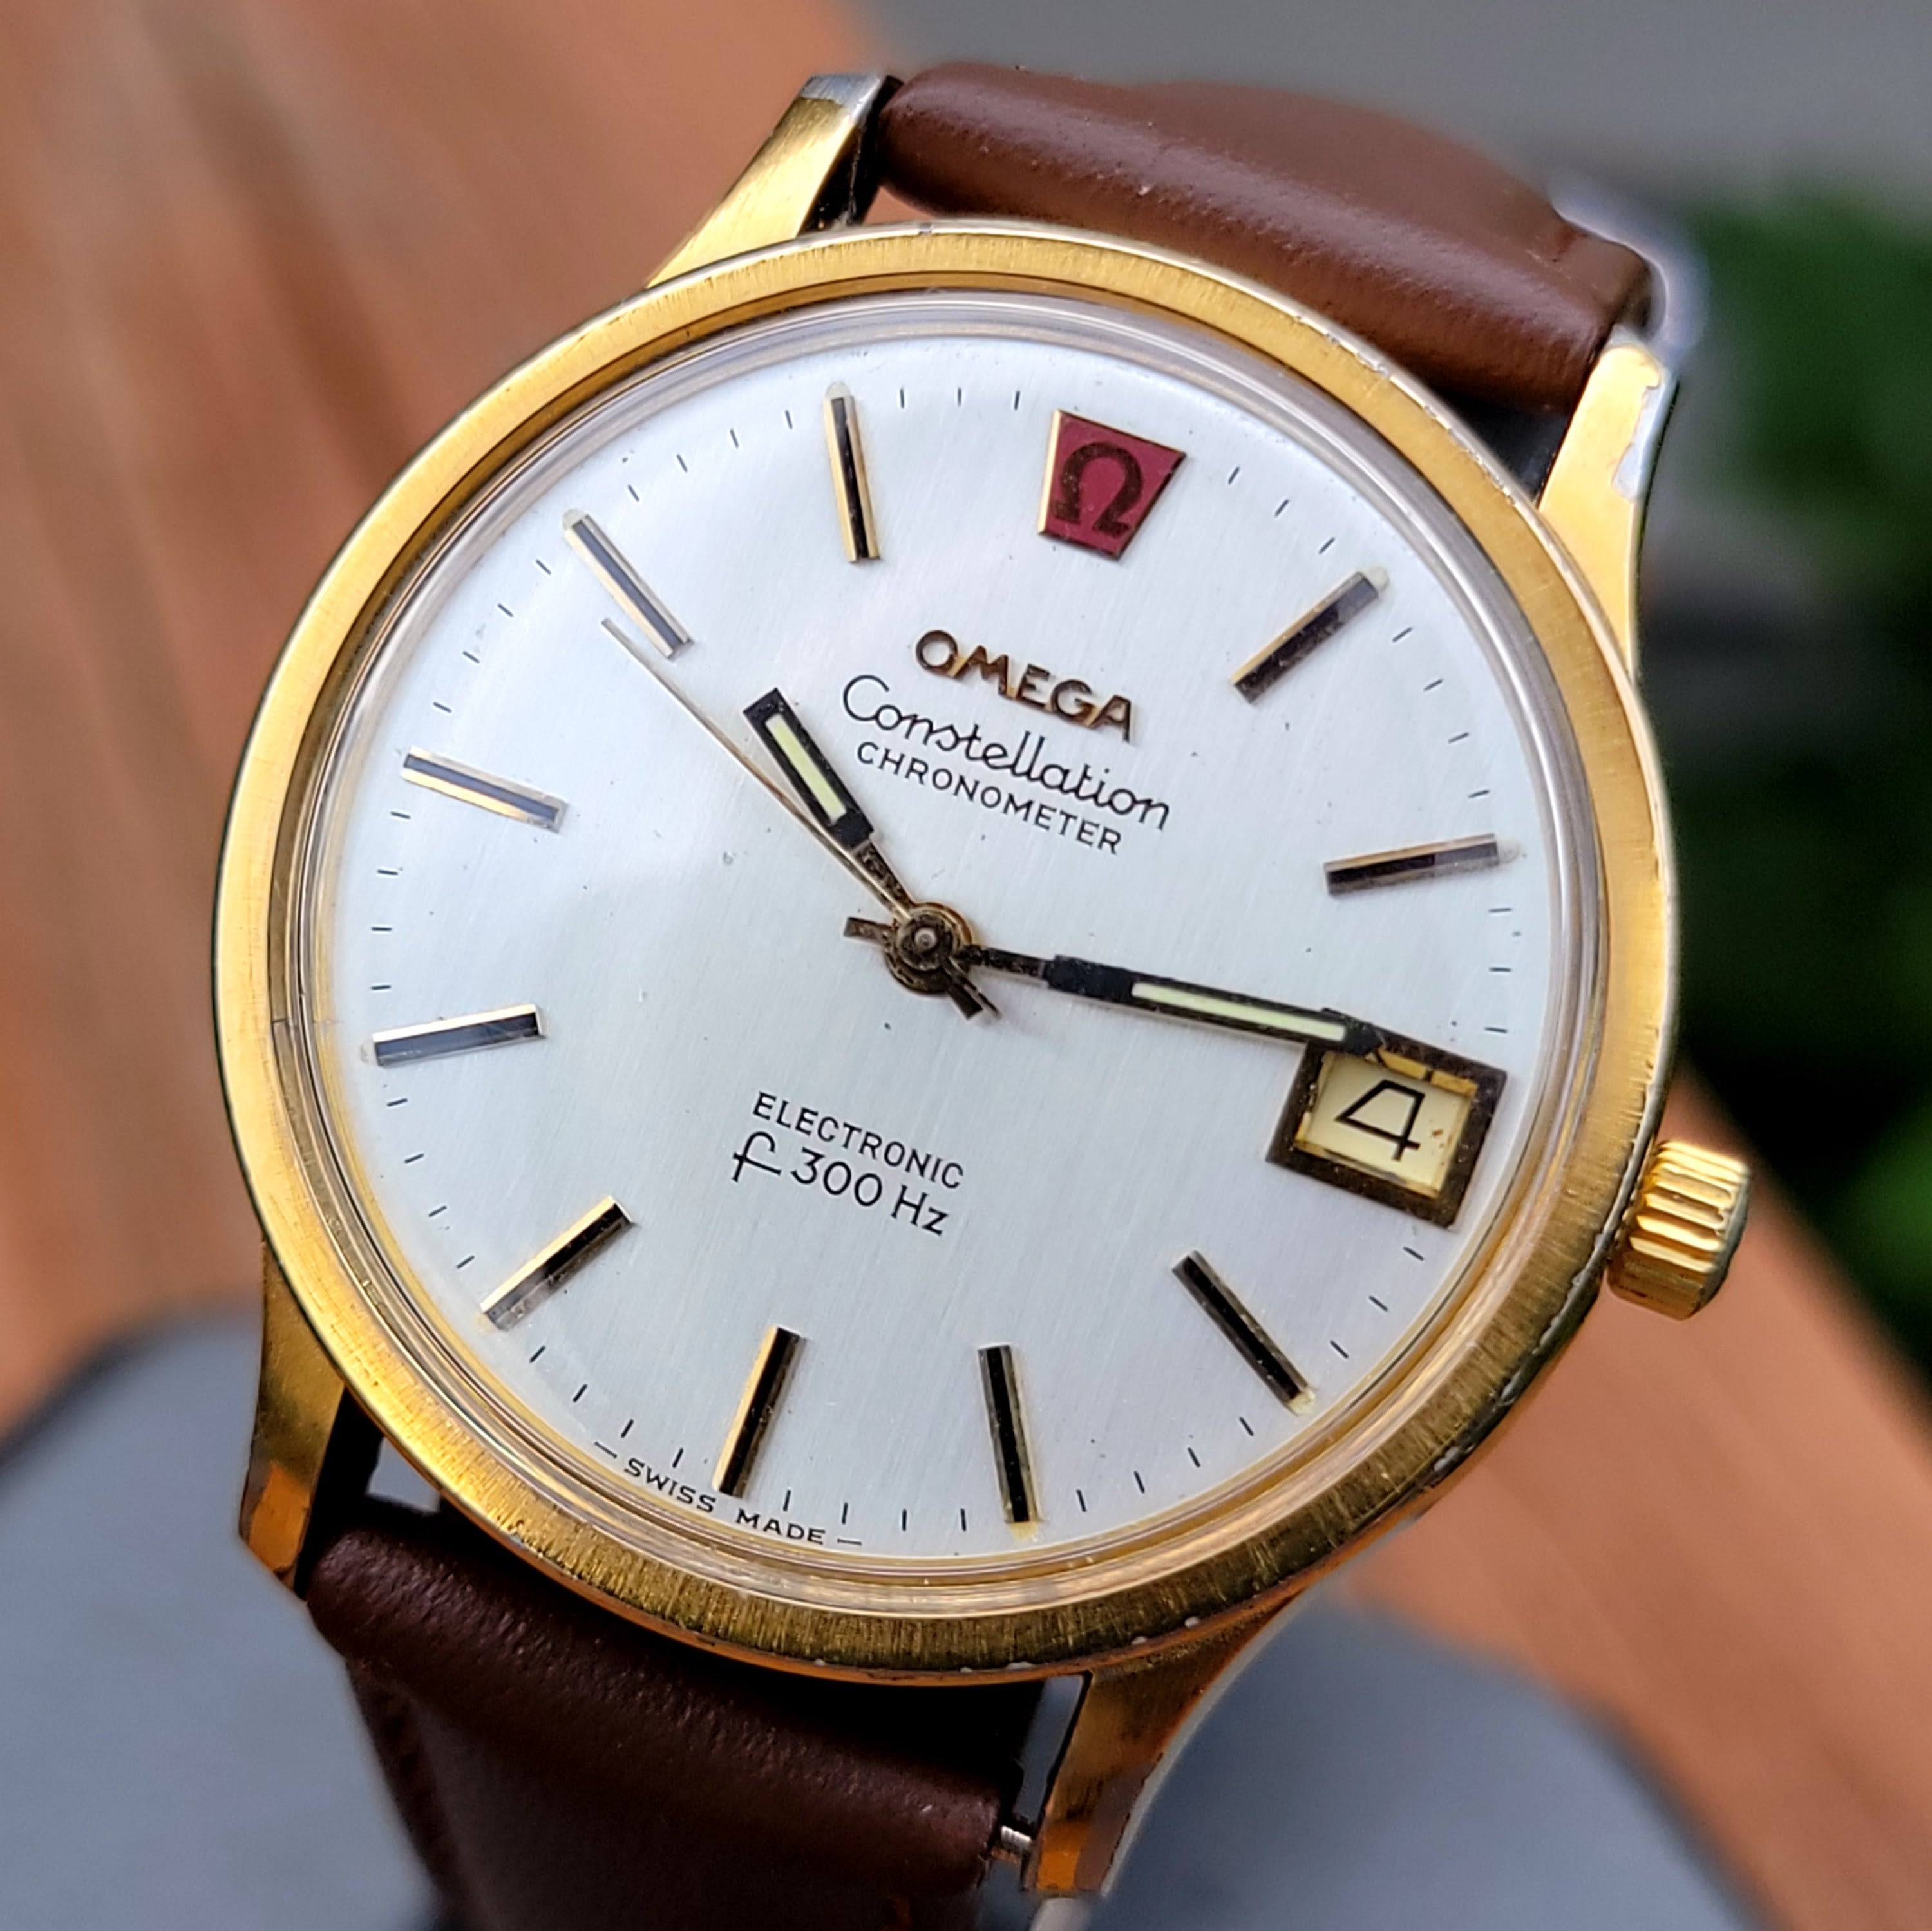 OMEGA Constellation Chronometer Electronic F300Hz Tuning Fork Watch